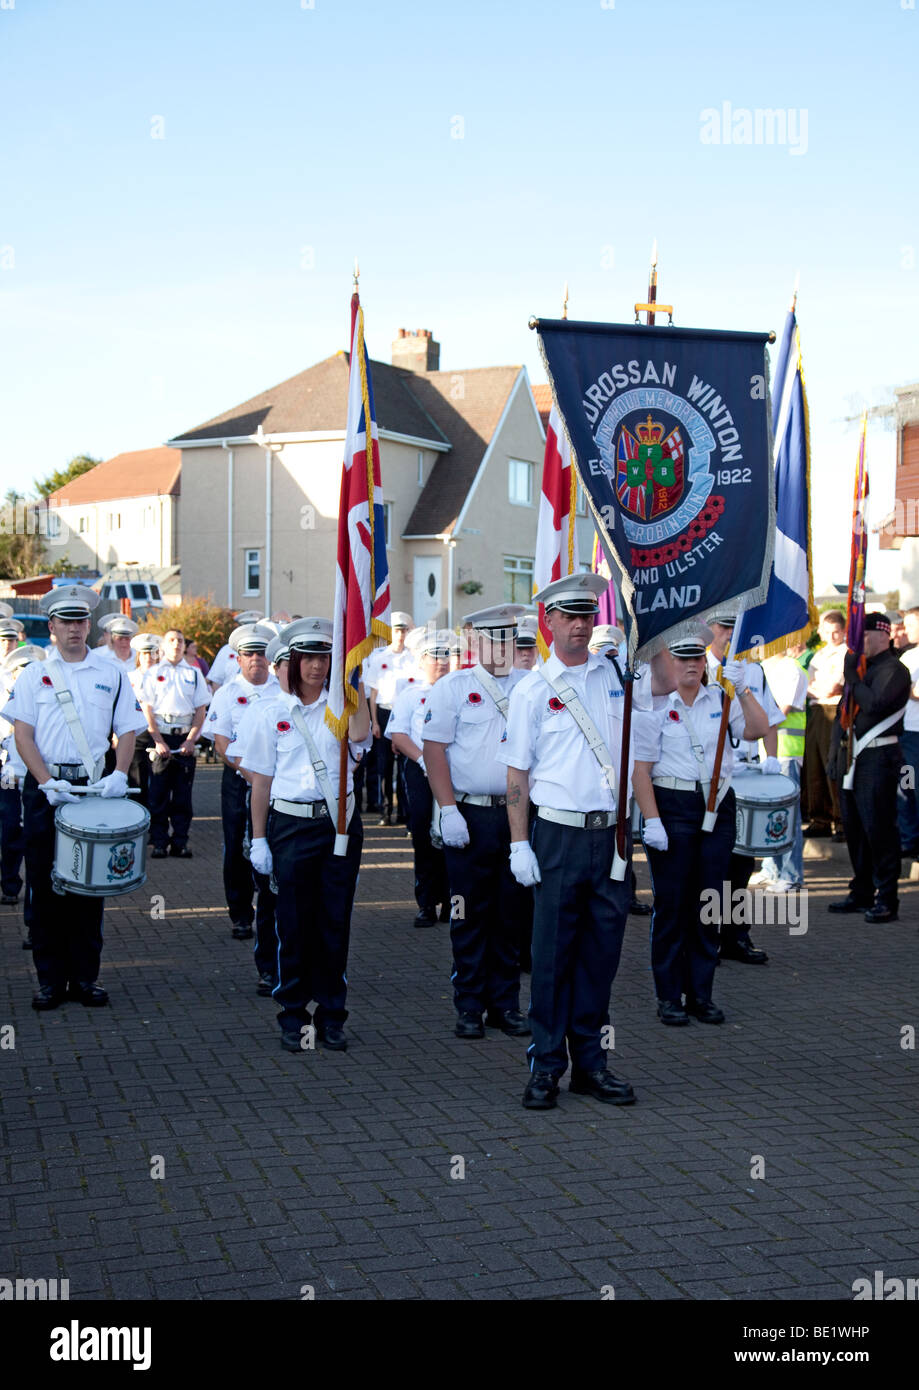 Ardrossan Winton Flute Band (Loyalist/Protestant) stand at the end of their parade in Kilwinning, North Ayrshire, Scotland, UK. Stock Photo